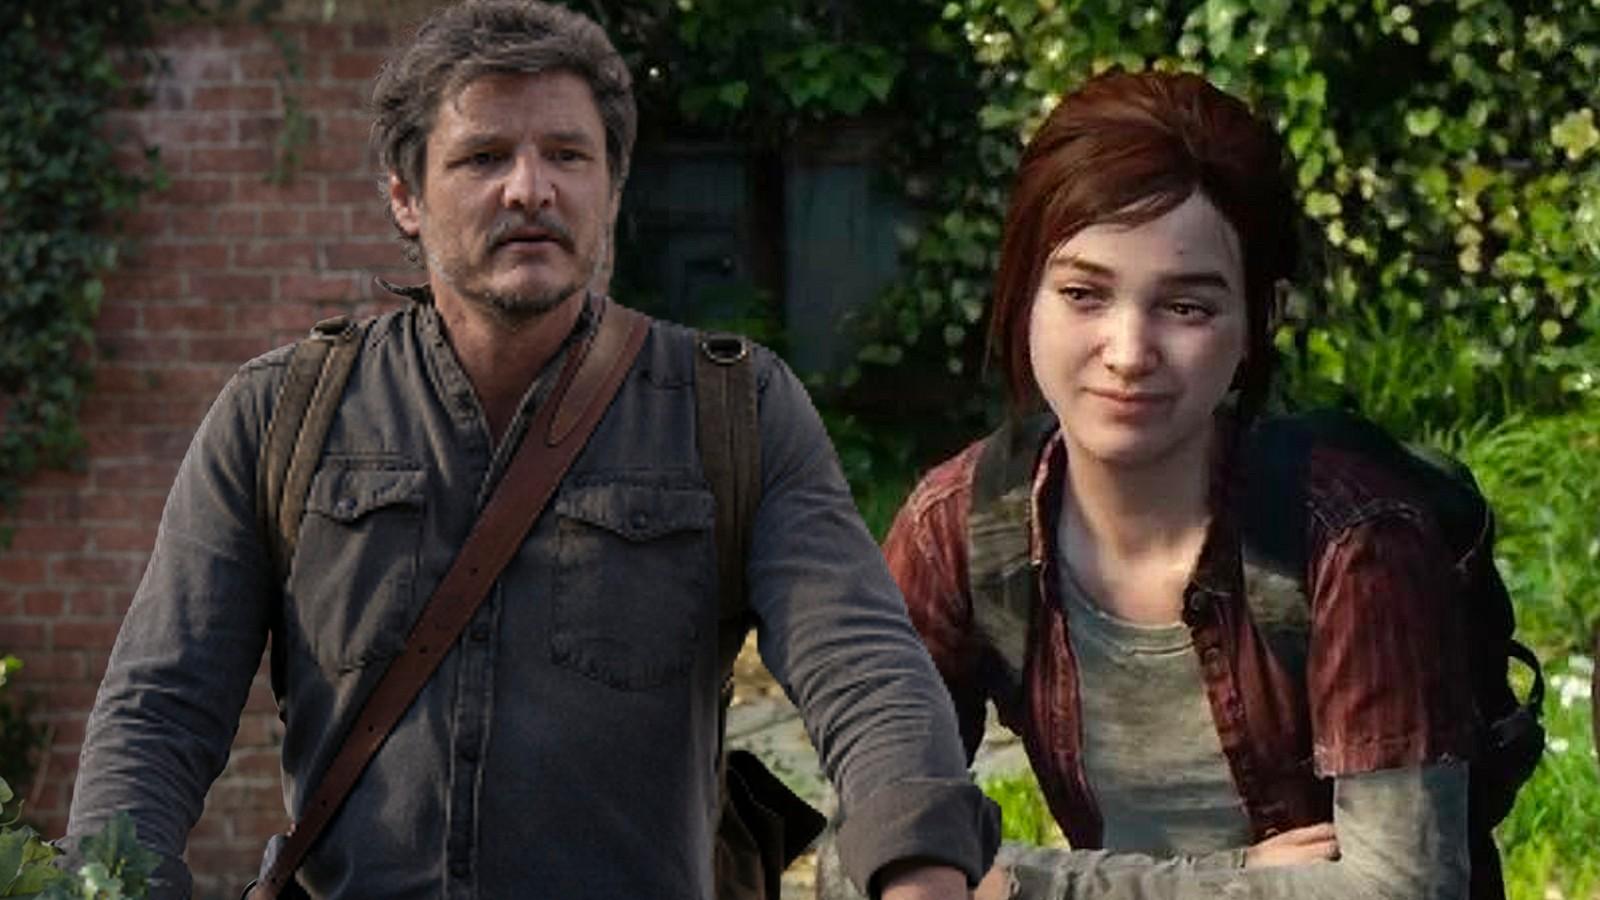 Joel and Ellie in The Last of Us show and game